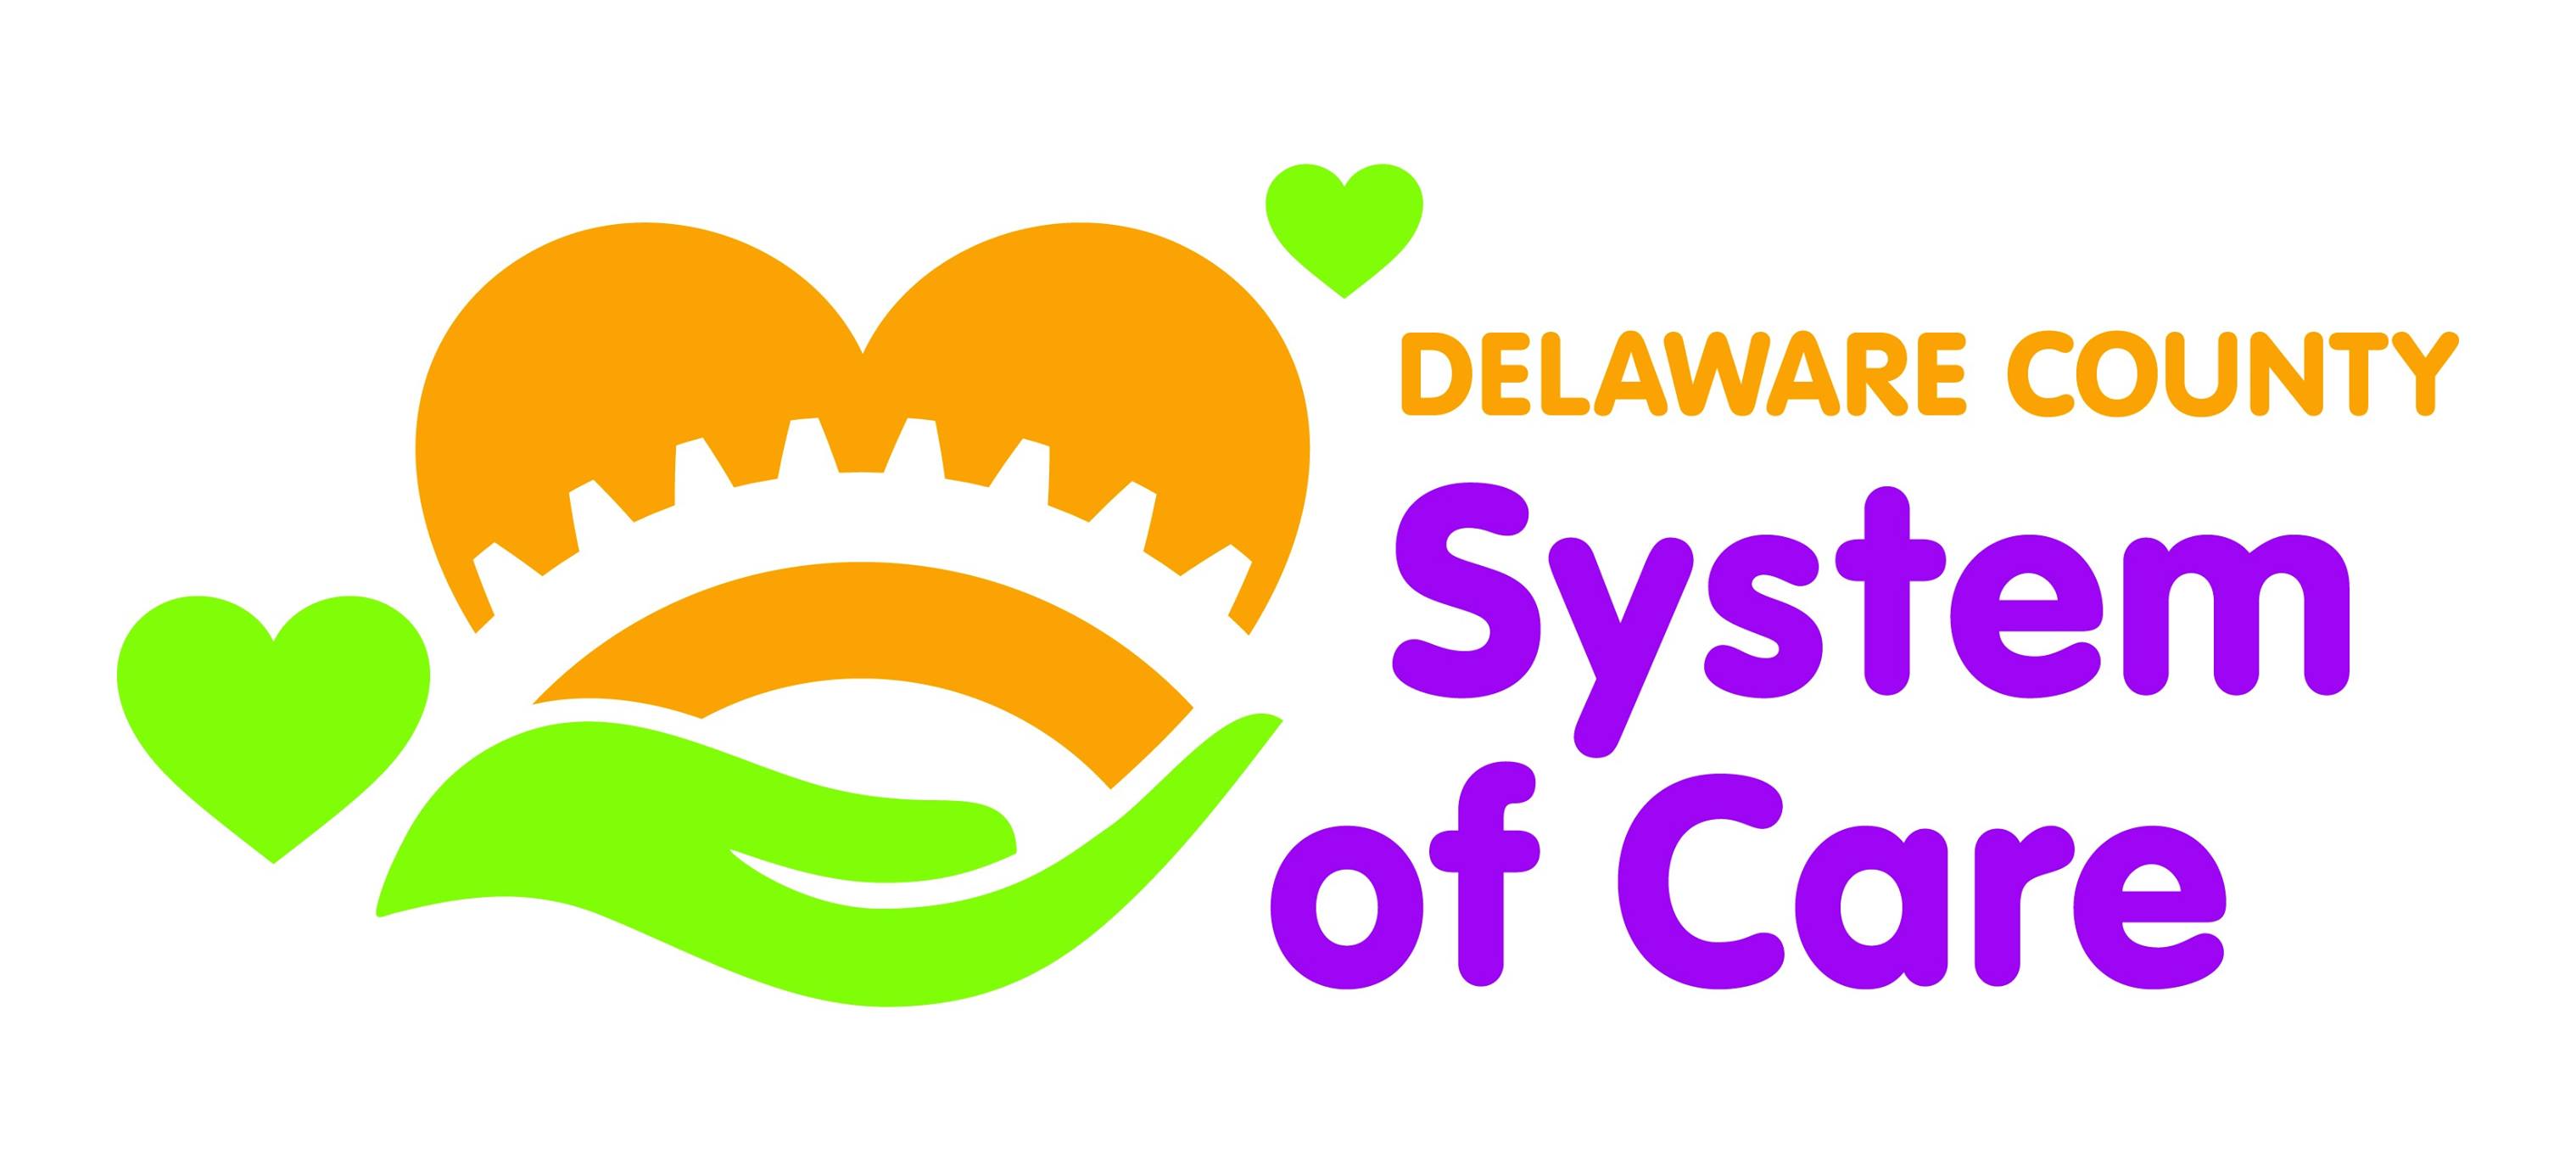 Delaware County System of Care